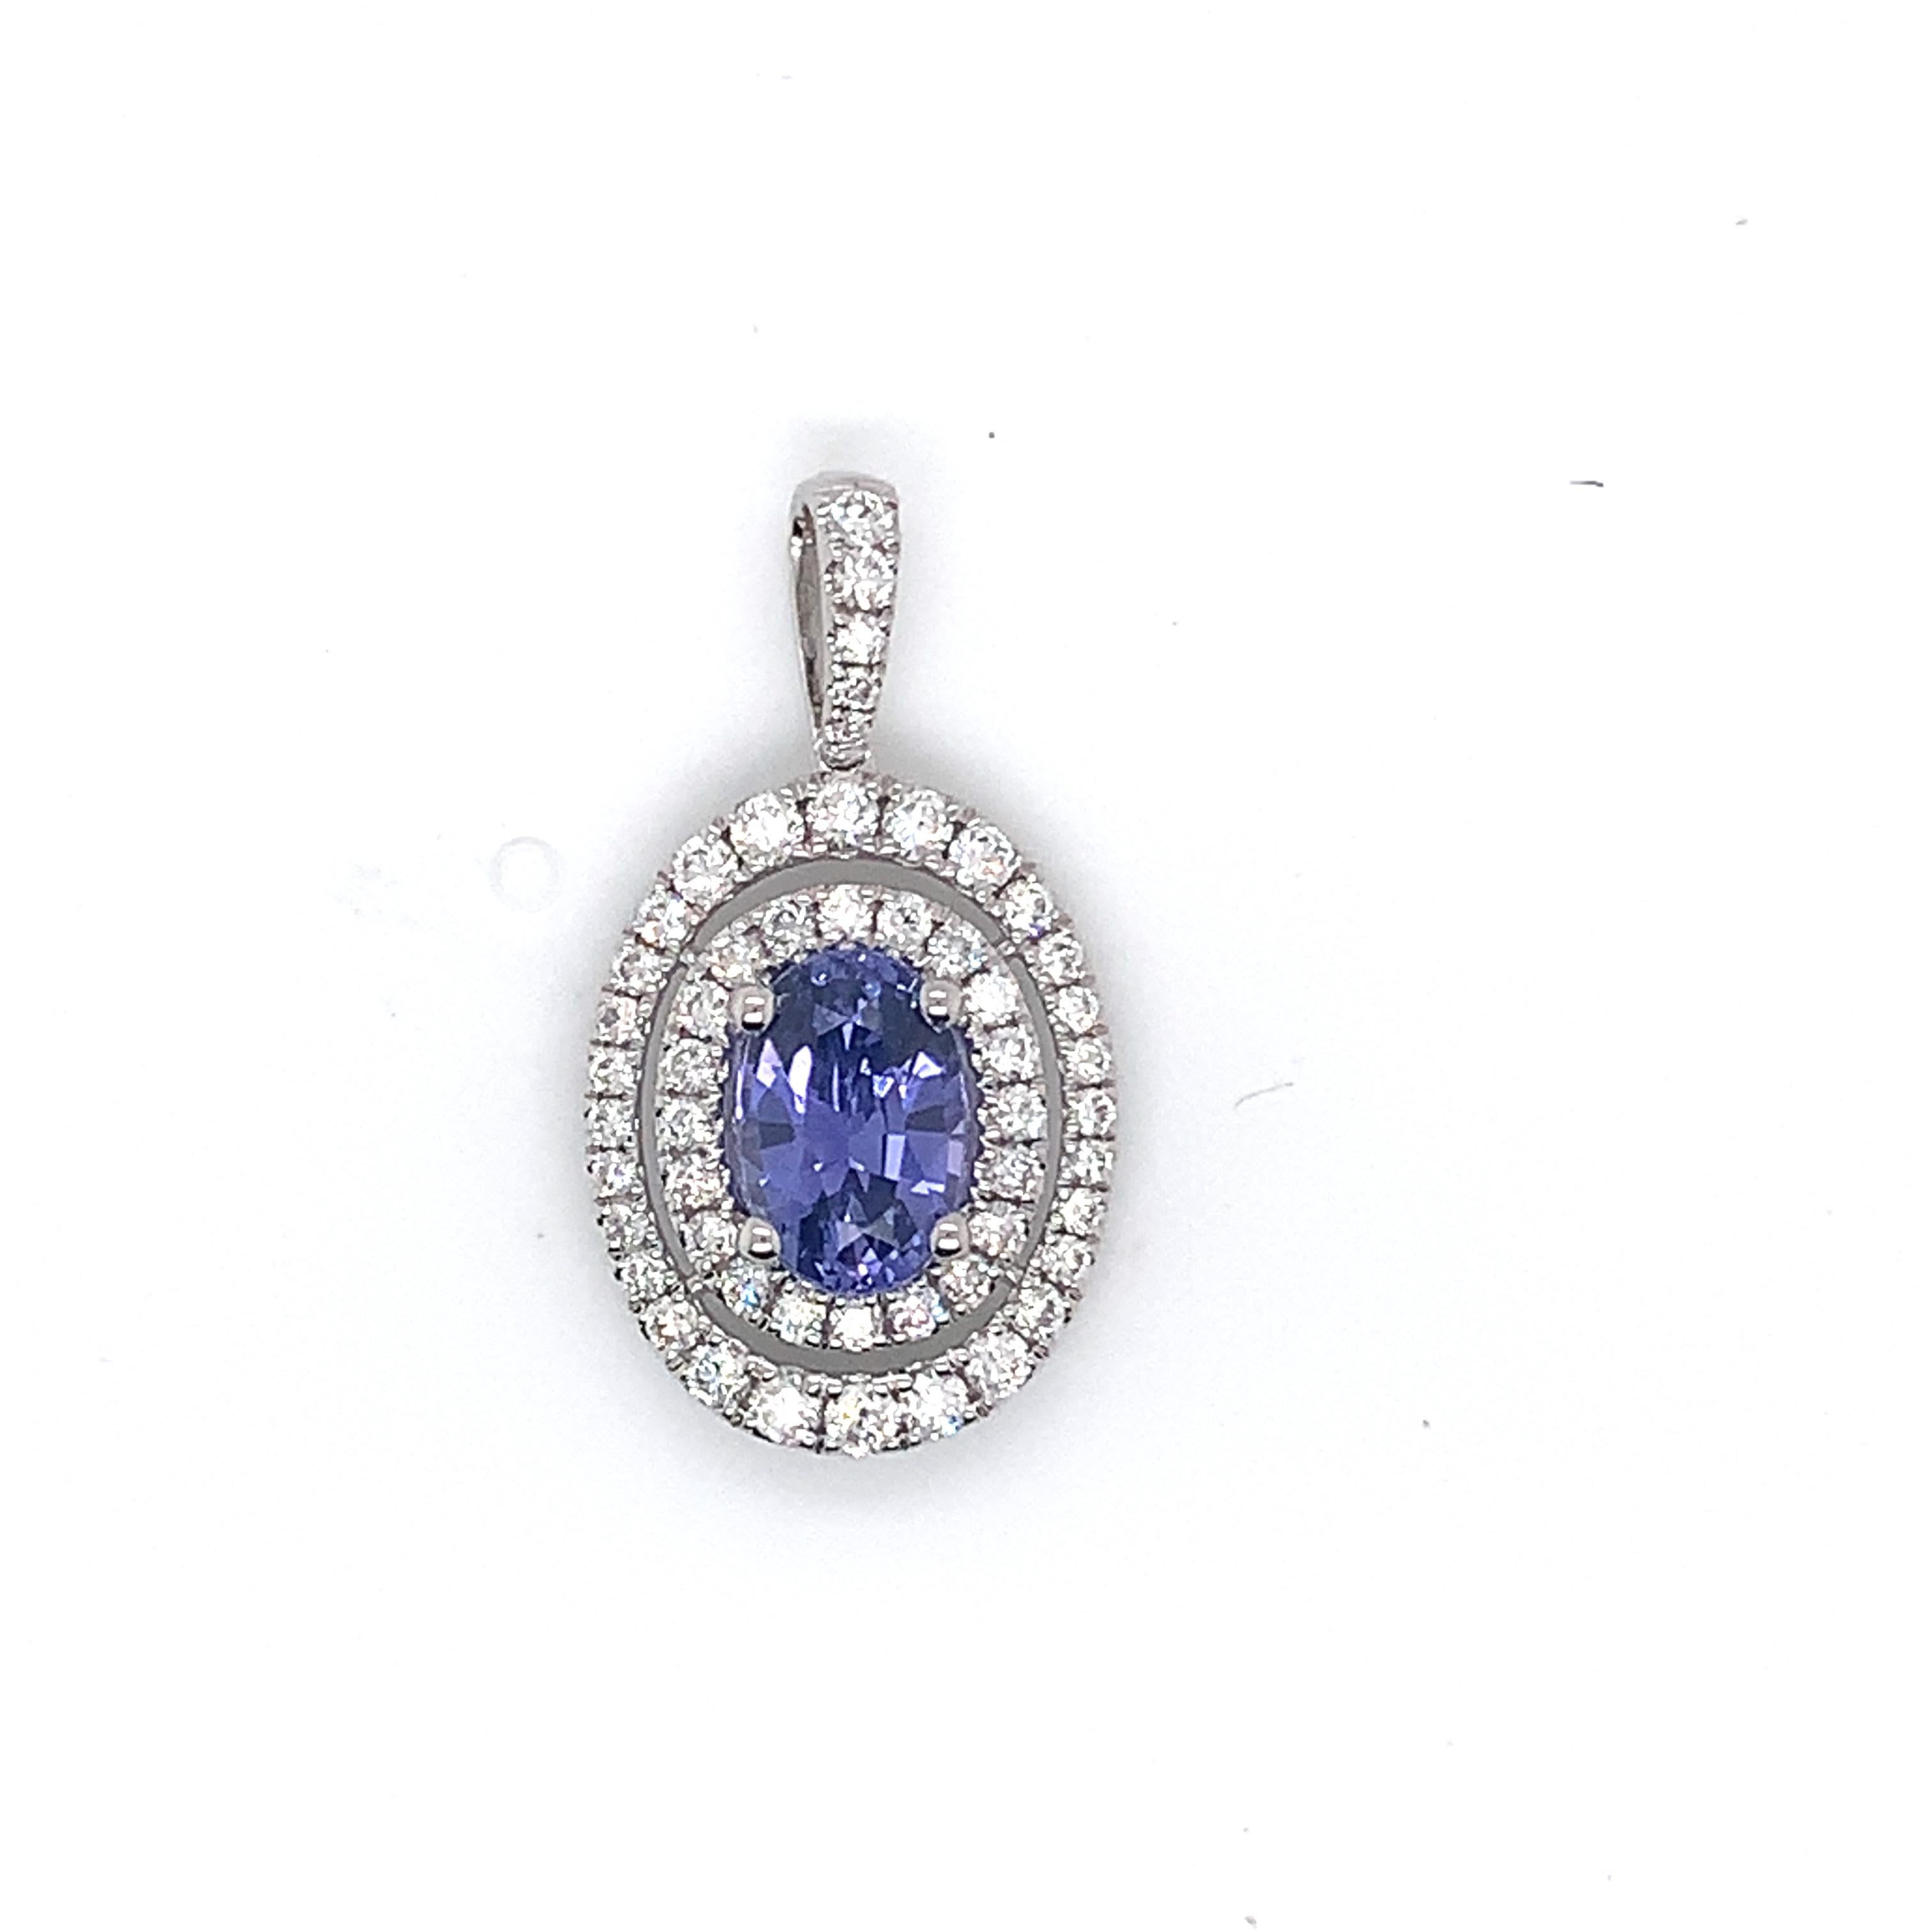 Purple Sapphire weighing 2.59 cts
53 round diamonds weighing .81 cts.
Set in 14k white gold pendant